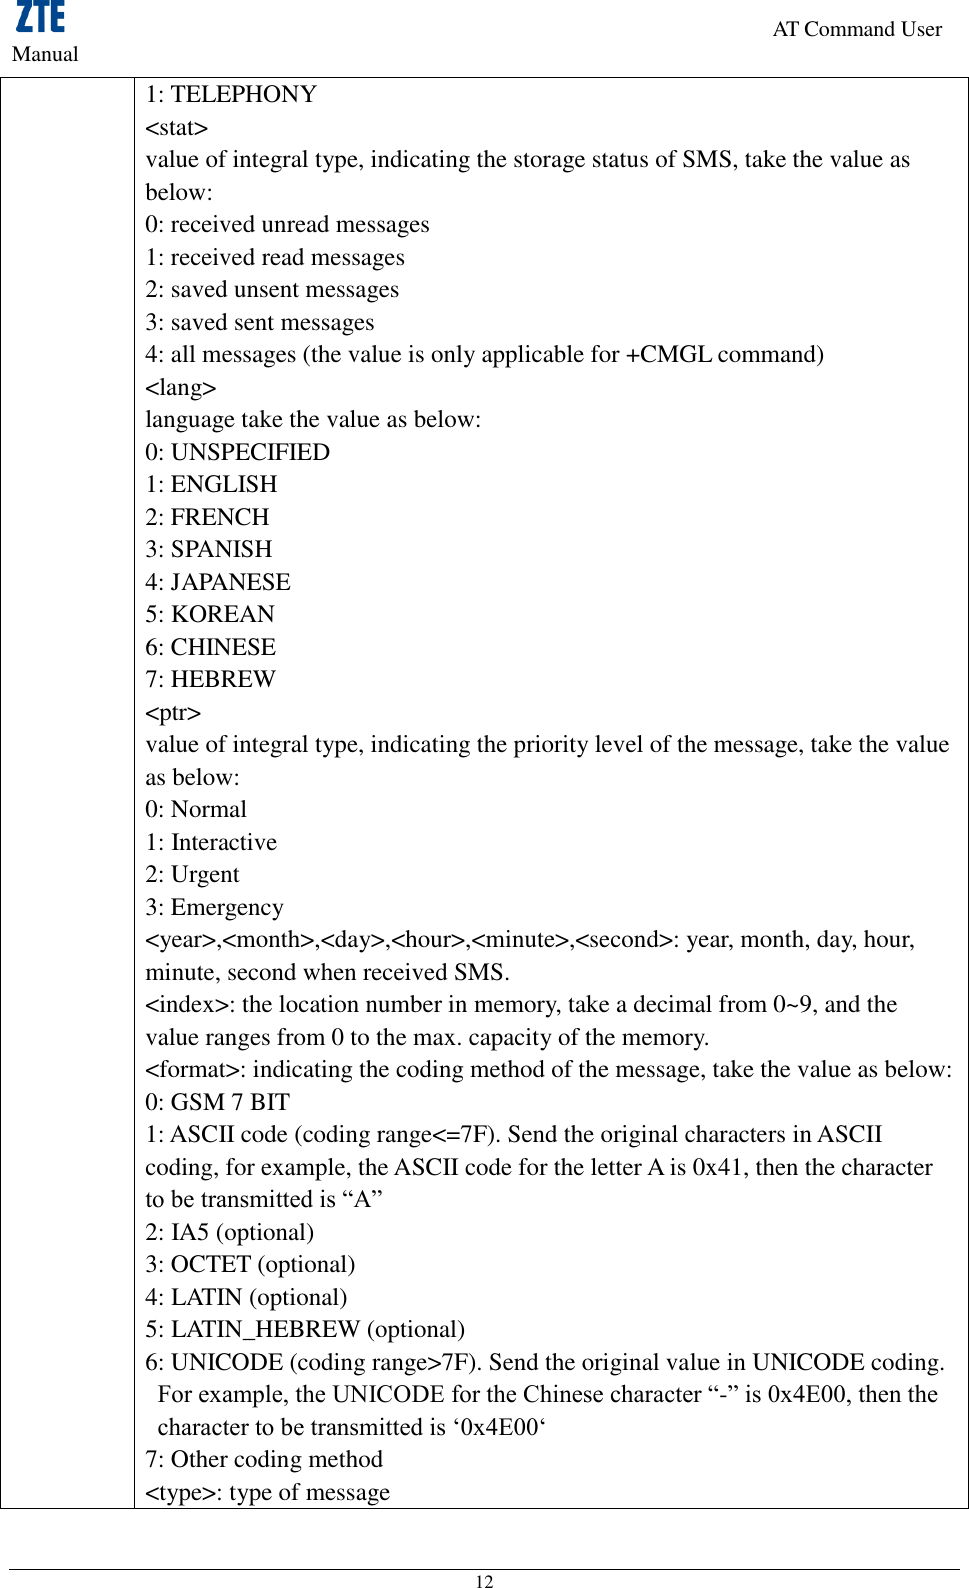                                                                     AT Command User Manual 12 1: TELEPHONY   &lt;stat&gt; value of integral type, indicating the storage status of SMS, take the value as below: 0: received unread messages     1: received read messages   2: saved unsent messages     3: saved sent messages   4: all messages (the value is only applicable for +CMGL command)   &lt;lang&gt;   language take the value as below:   0: UNSPECIFIED   1: ENGLISH   2: FRENCH   3: SPANISH   4: JAPANESE   5: KOREAN   6: CHINESE   7: HEBREW &lt;ptr&gt; value of integral type, indicating the priority level of the message, take the value as below:   0: Normal   1: Interactive   2: Urgent   3: Emergency   &lt;year&gt;,&lt;month&gt;,&lt;day&gt;,&lt;hour&gt;,&lt;minute&gt;,&lt;second&gt;: year, month, day, hour, minute, second when received SMS.   &lt;index&gt;: the location number in memory, take a decimal from 0~9, and the value ranges from 0 to the max. capacity of the memory.     &lt;format&gt;: indicating the coding method of the message, take the value as below:   0: GSM 7 BIT   1: ASCII code (coding range&lt;=7F). Send the original characters in ASCII coding, for example, the ASCII code for the letter A is 0x41, then the character to be transmitted is “A”   2: IA5 (optional)   3: OCTET (optional)   4: LATIN (optional)   5: LATIN_HEBREW (optional)   6: UNICODE (coding range&gt;7F). Send the original value in UNICODE coding. For example, the UNICODE for the Chinese character “-” is 0x4E00, then the character to be transmitted is „0x4E00„ 7: Other coding method   &lt;type&gt;: type of message   